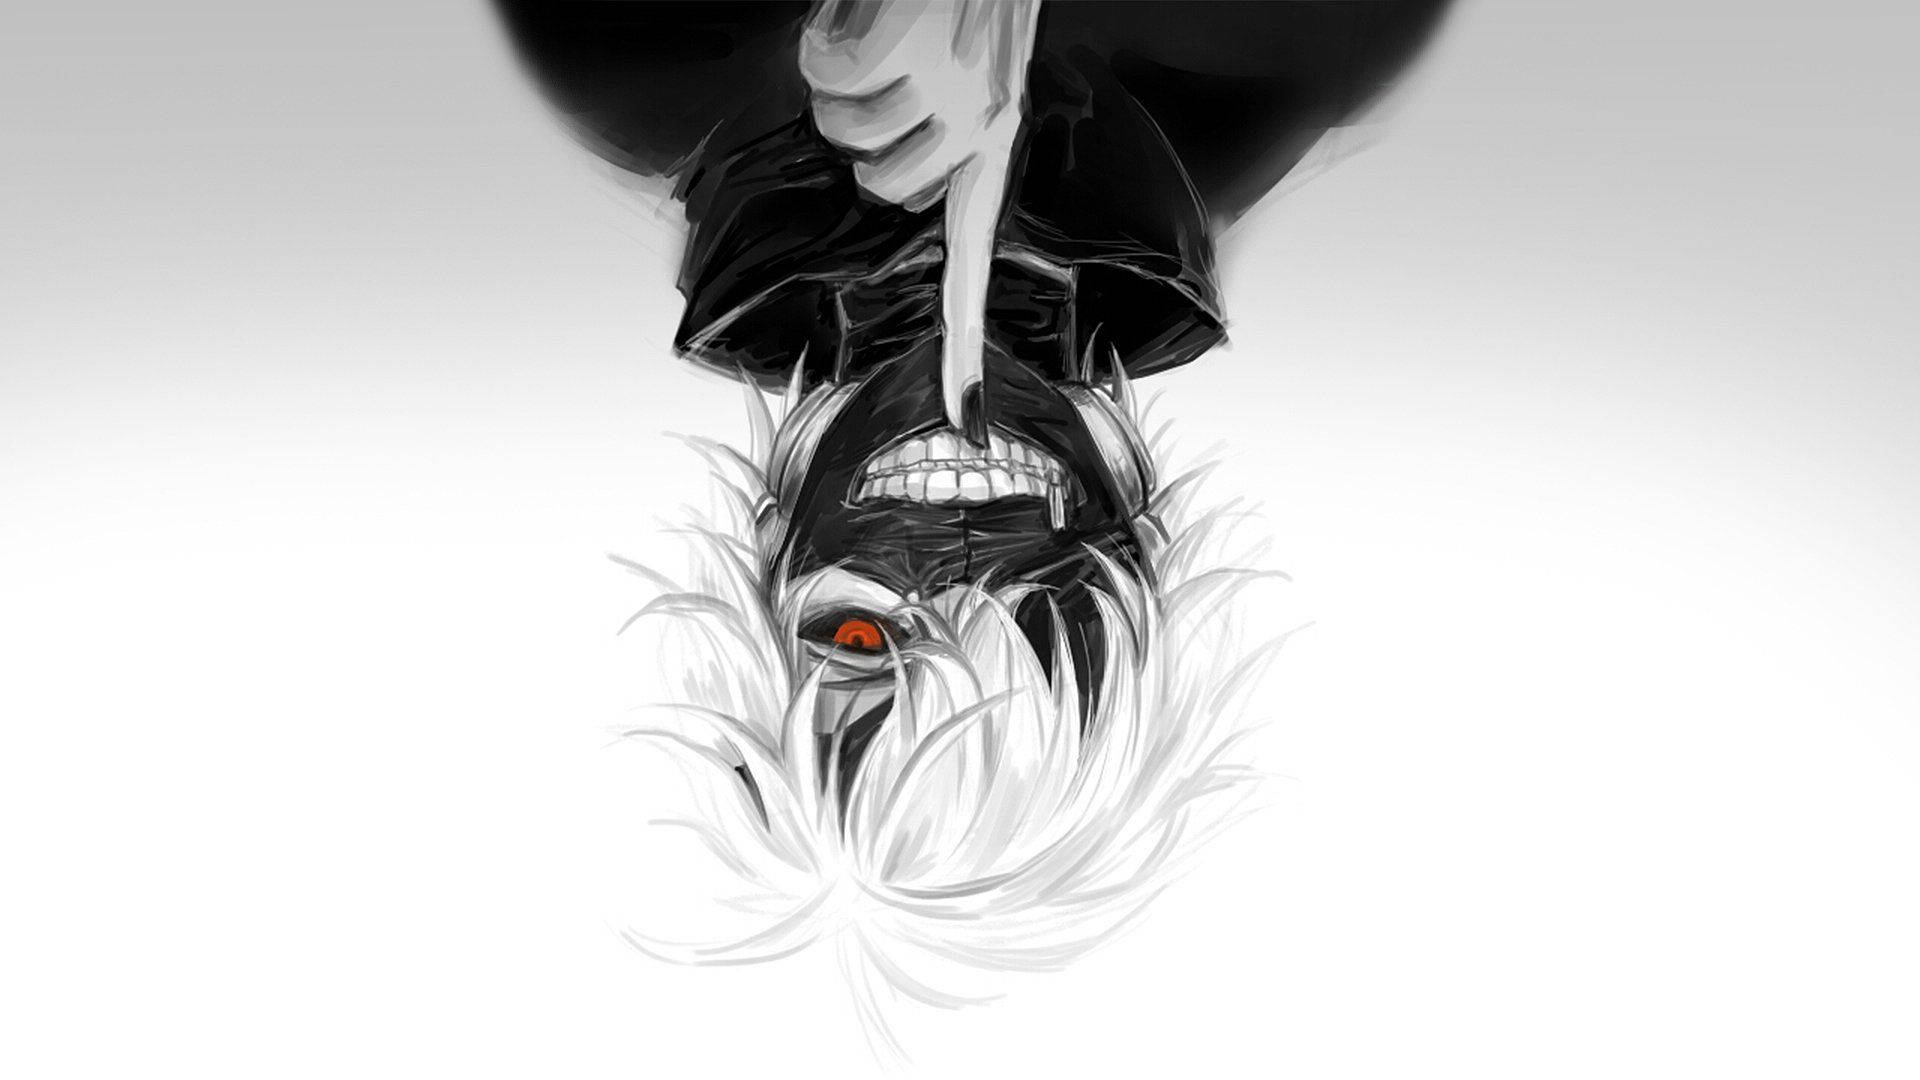 Free Tokyo Ghoul Wallpaper Downloads, [200+] Tokyo Ghoul Wallpapers for  FREE 